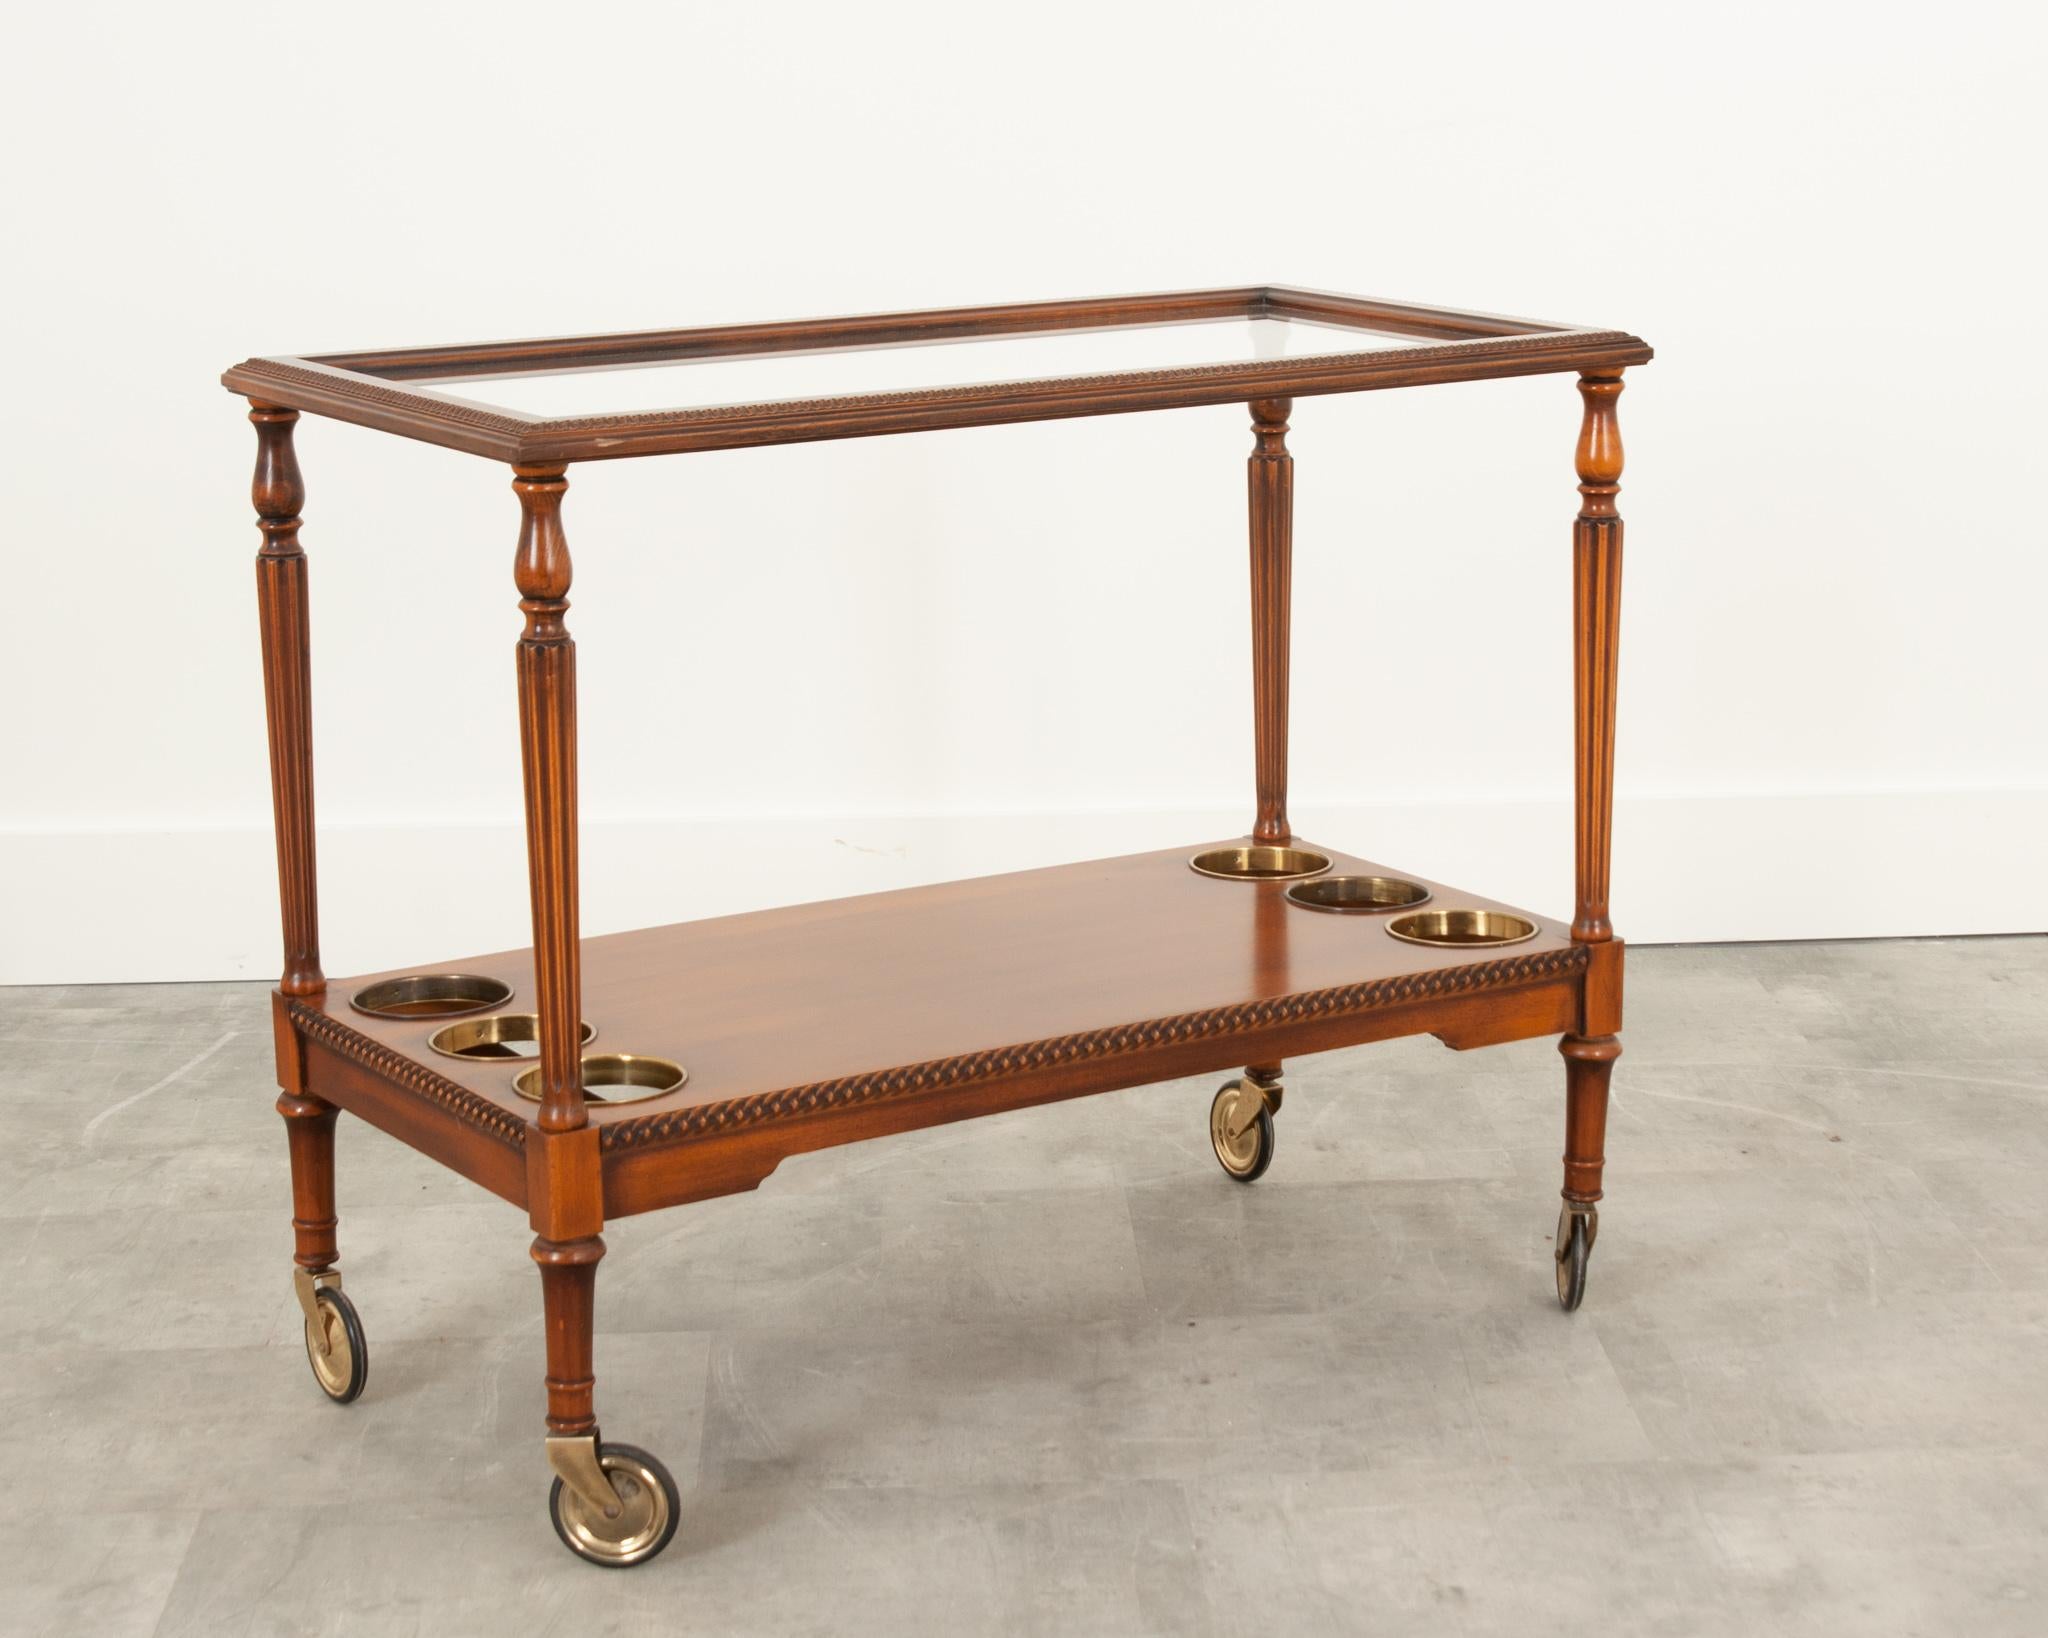 This vintage French bar cart is the perfect antique element to elevate any bar room or living space. The warmly toned mahogany frame suspends the glass top and showcases decorative carving around the perimeter. Turned, fluted legs connect to a lower